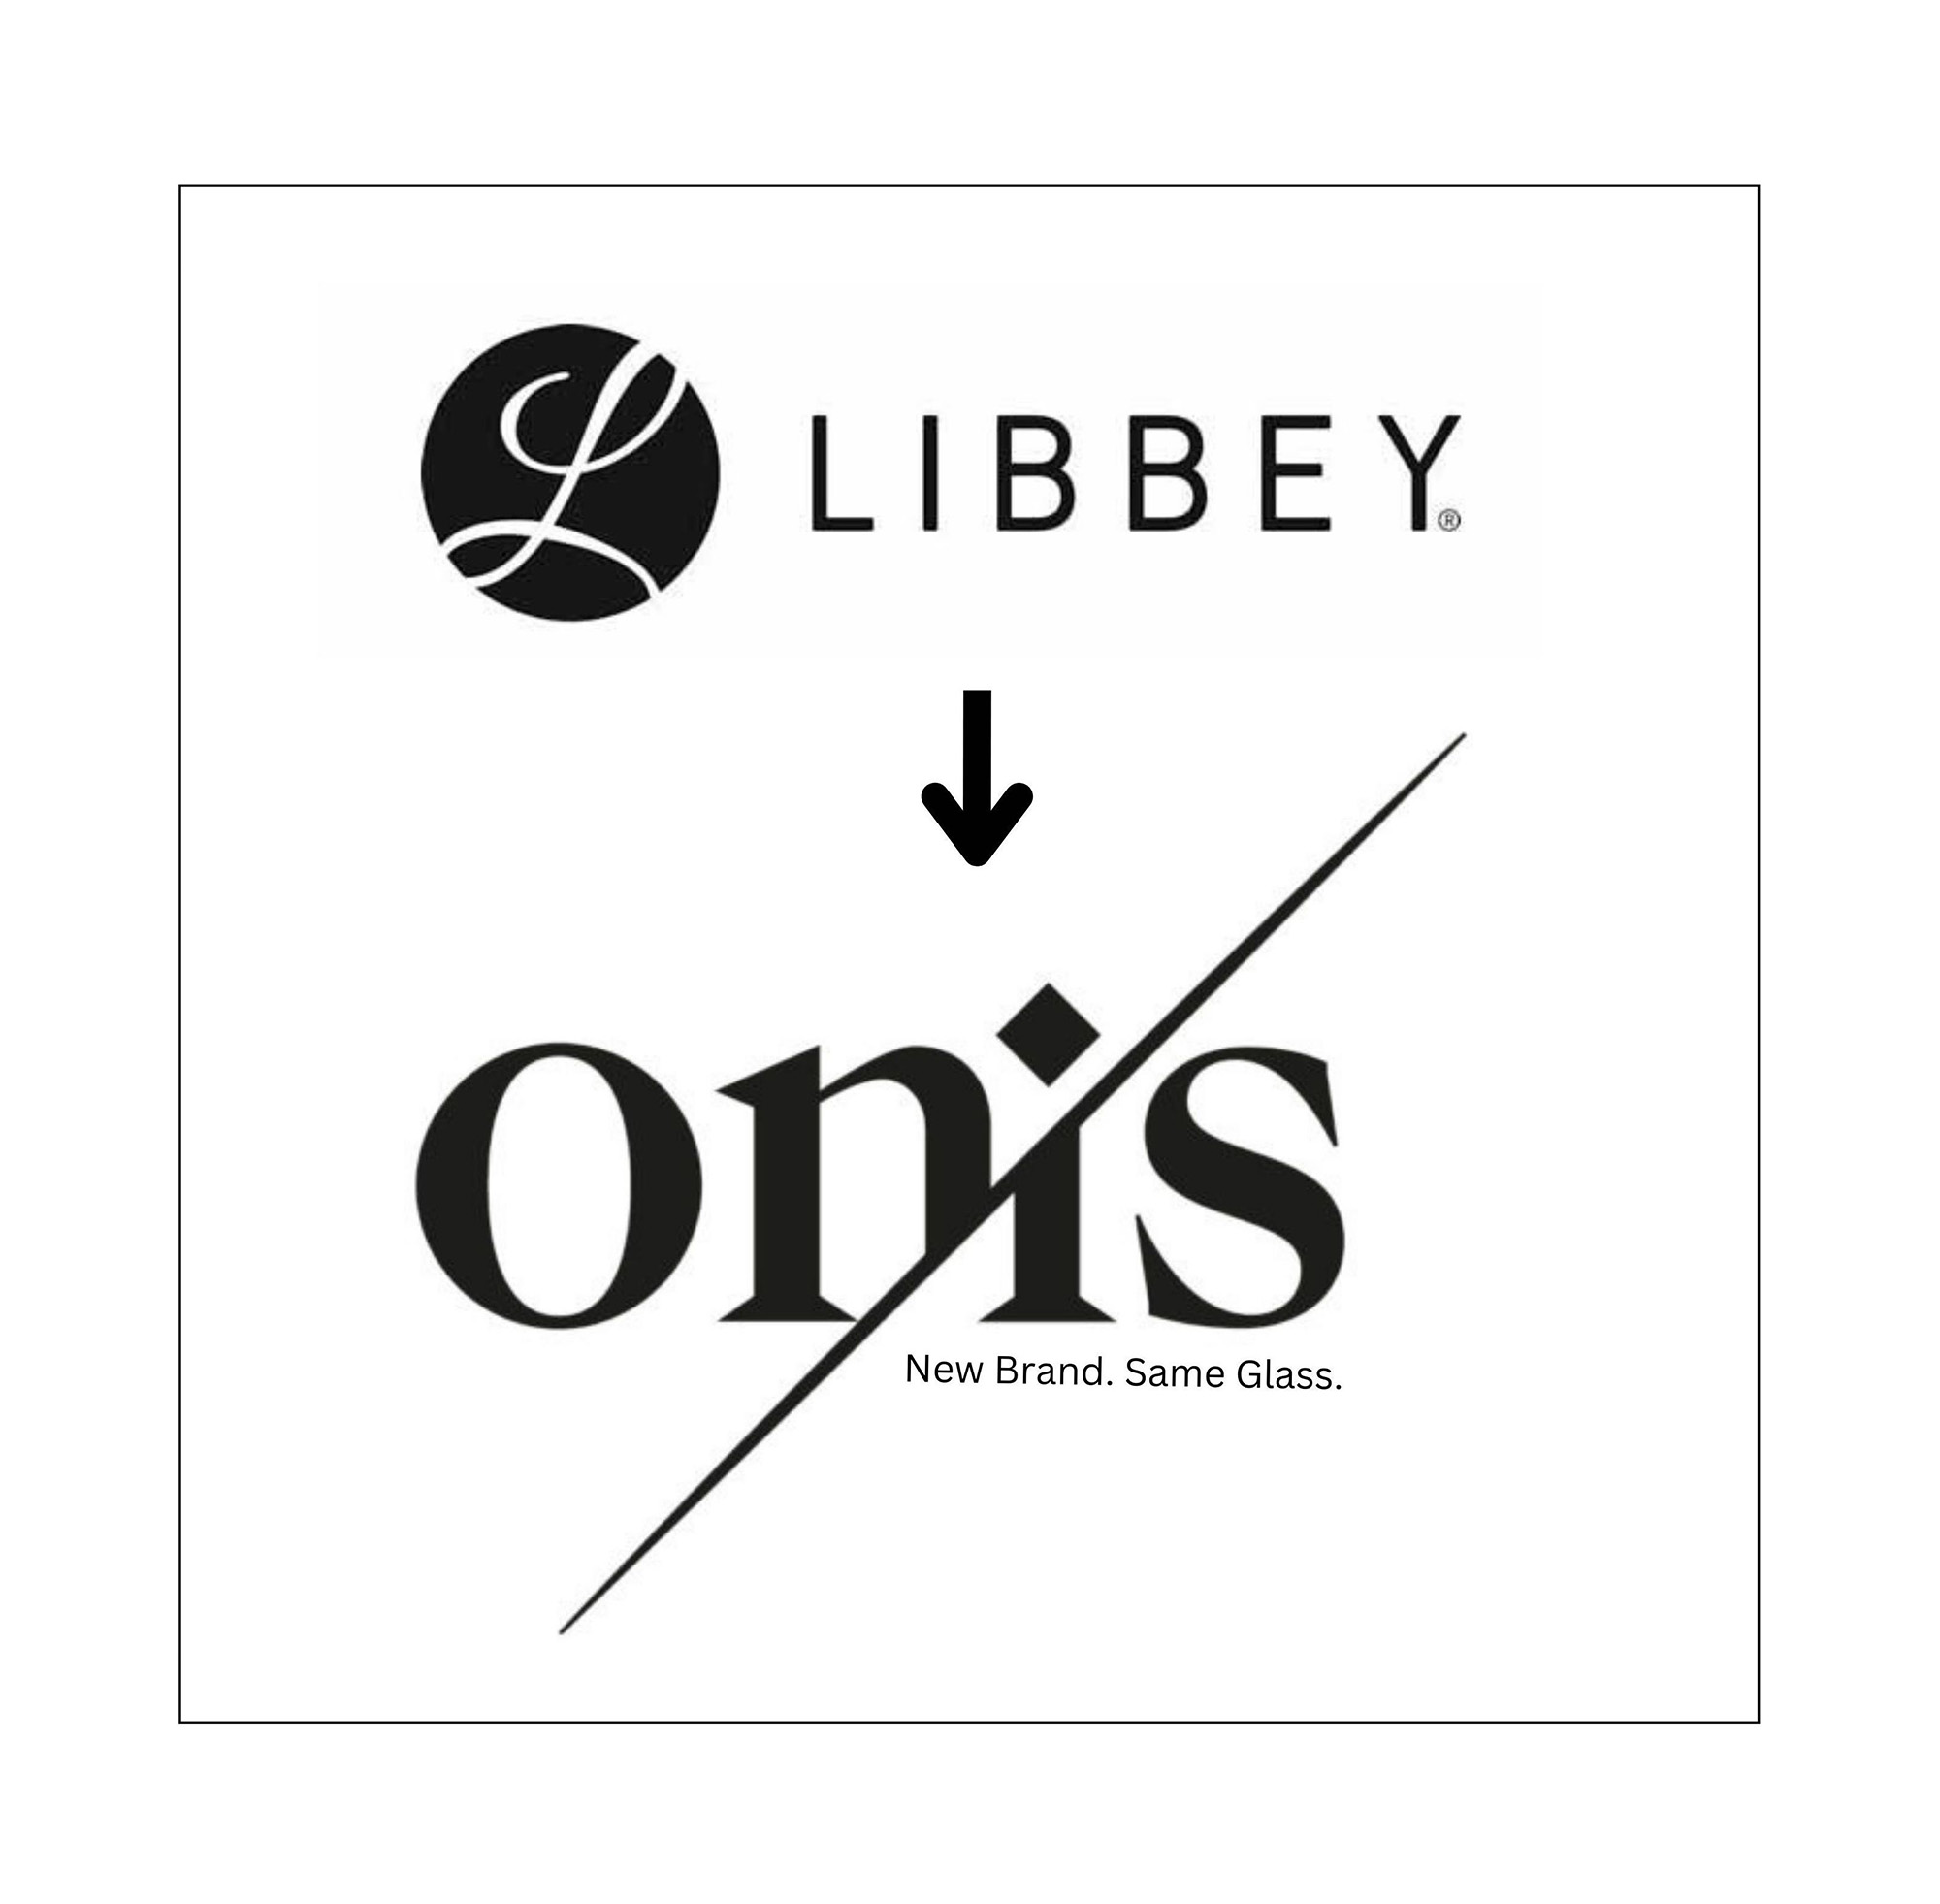 Libbey (Onis) 1